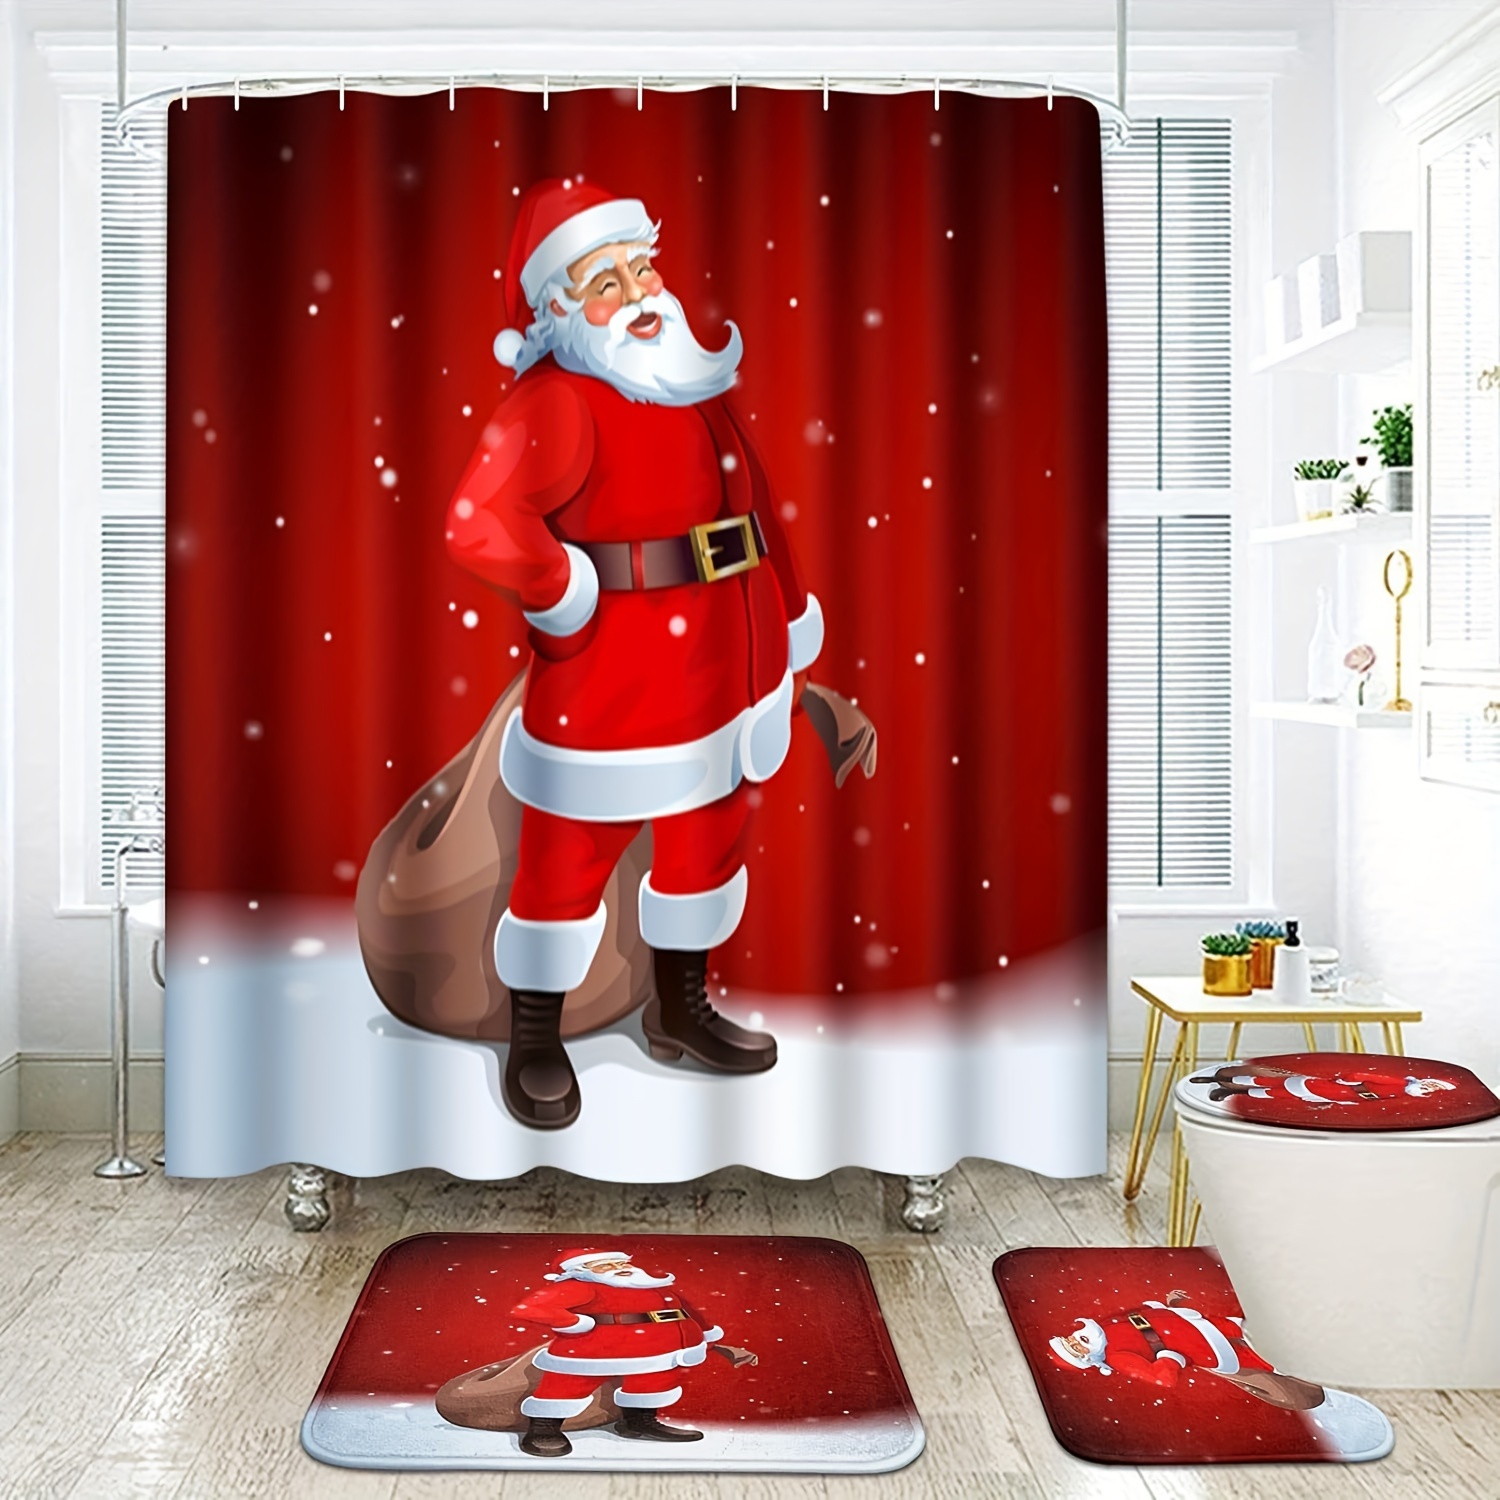 

4 Piece Shower Curtain Sets, Santa Claus Christmas Tree Cartoon With Non-slip Rugs, Toilet Lid Cover And Bath Mat, For Bathroom Decor Set, 72" X 72